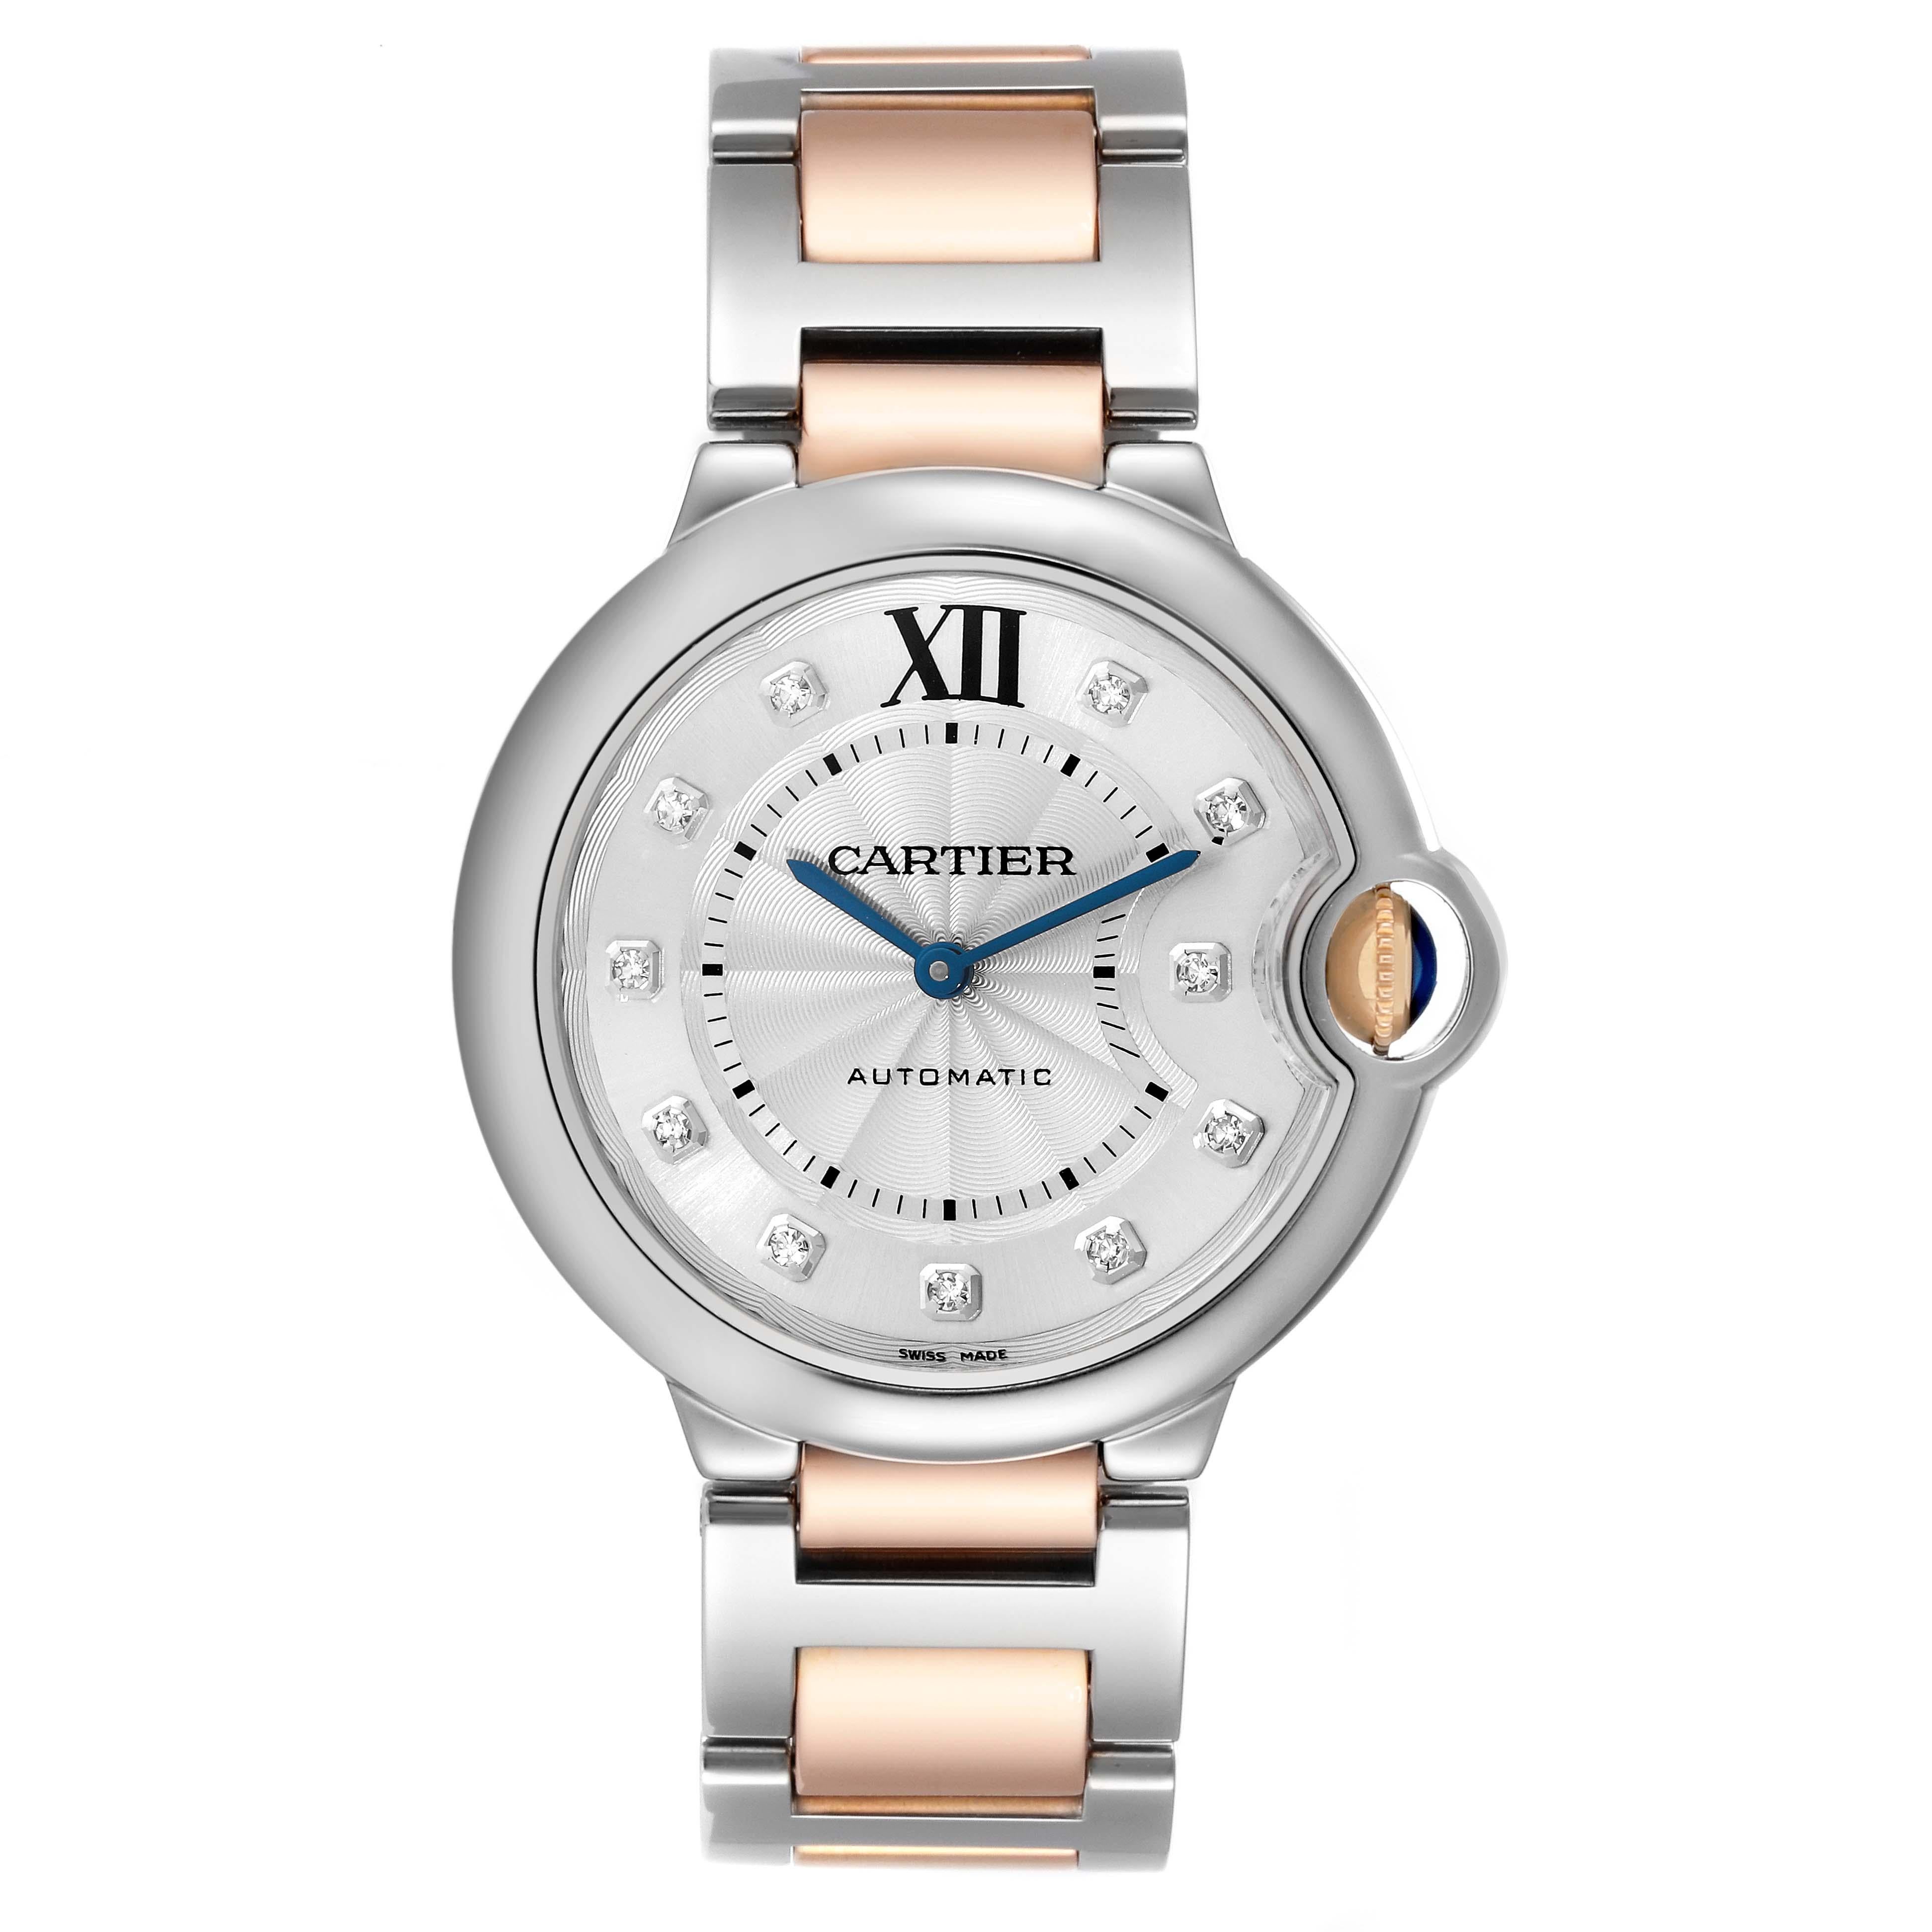 Cartier Ballon Bleu Midsize Steel Rose Gold Diamond Ladies Watch W3BB0018 Papers. Automatic self-winding movement. Stainless steel case 36 mm in diameter. 18k rose gold fluted crown set with a blue spinel cabochon. Stainless steel smooth bezel.